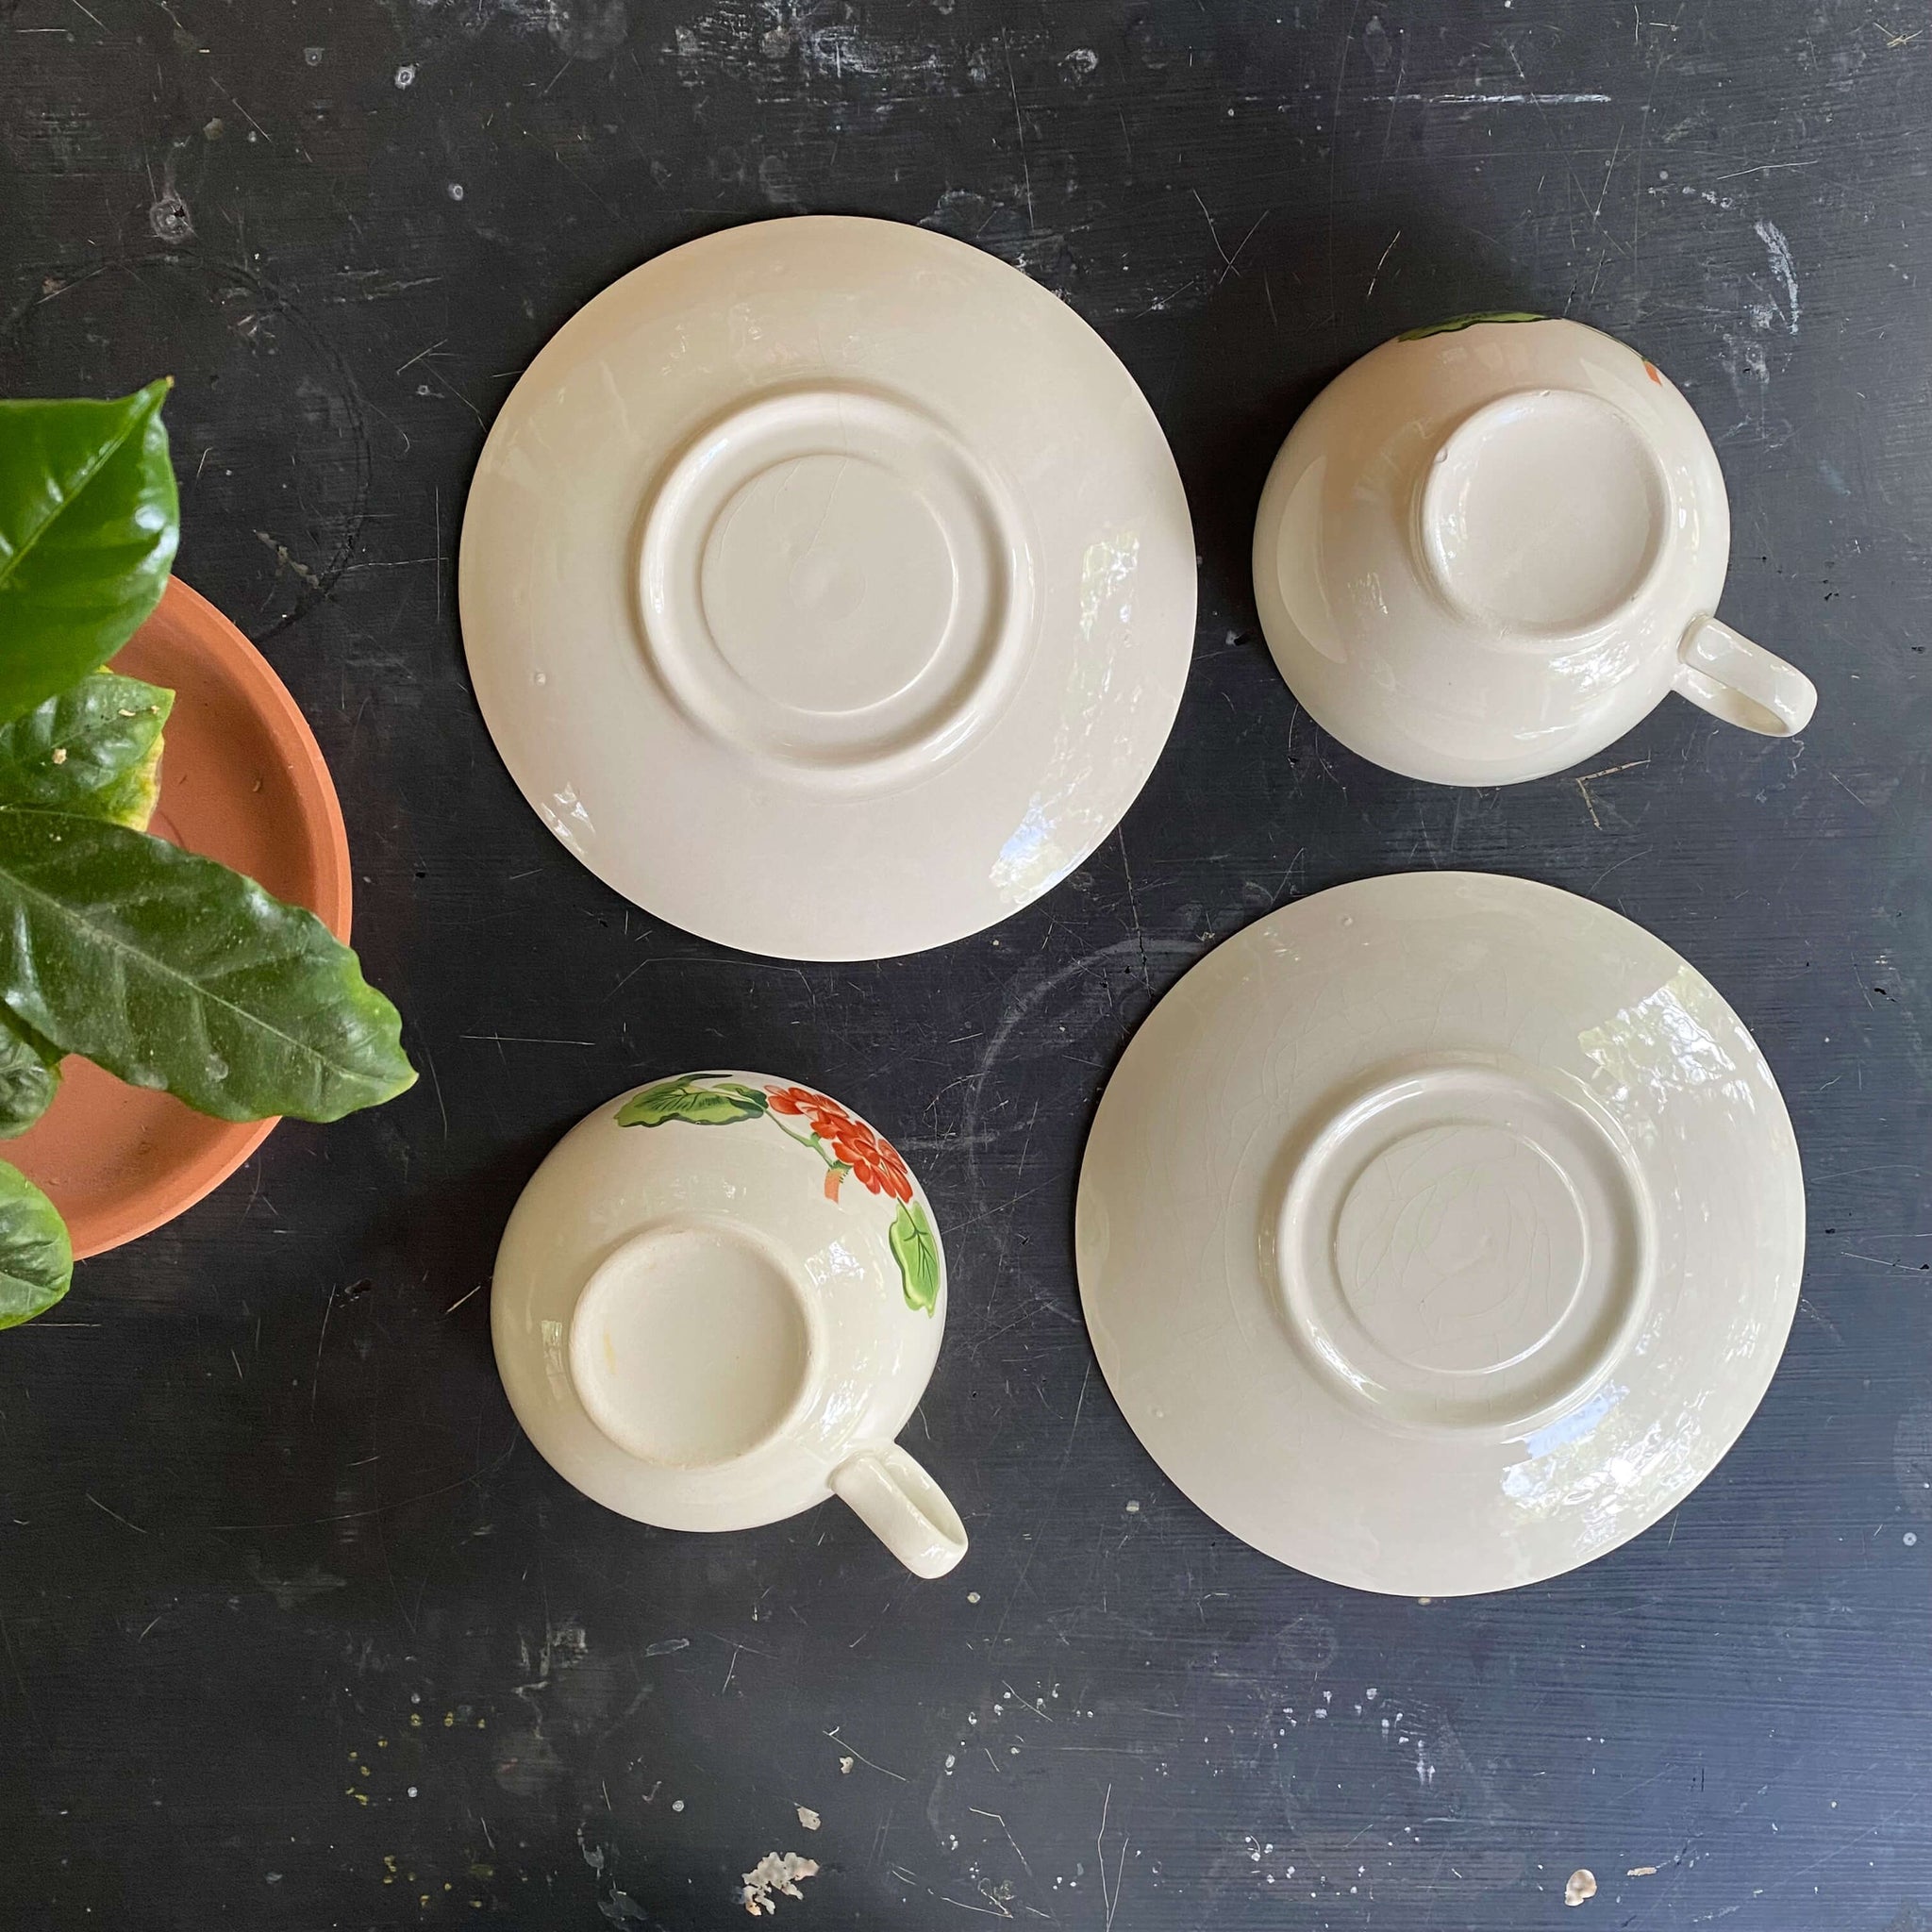 Vintage 1950s Salem China Geranium Cups and Saucers - Set of Two